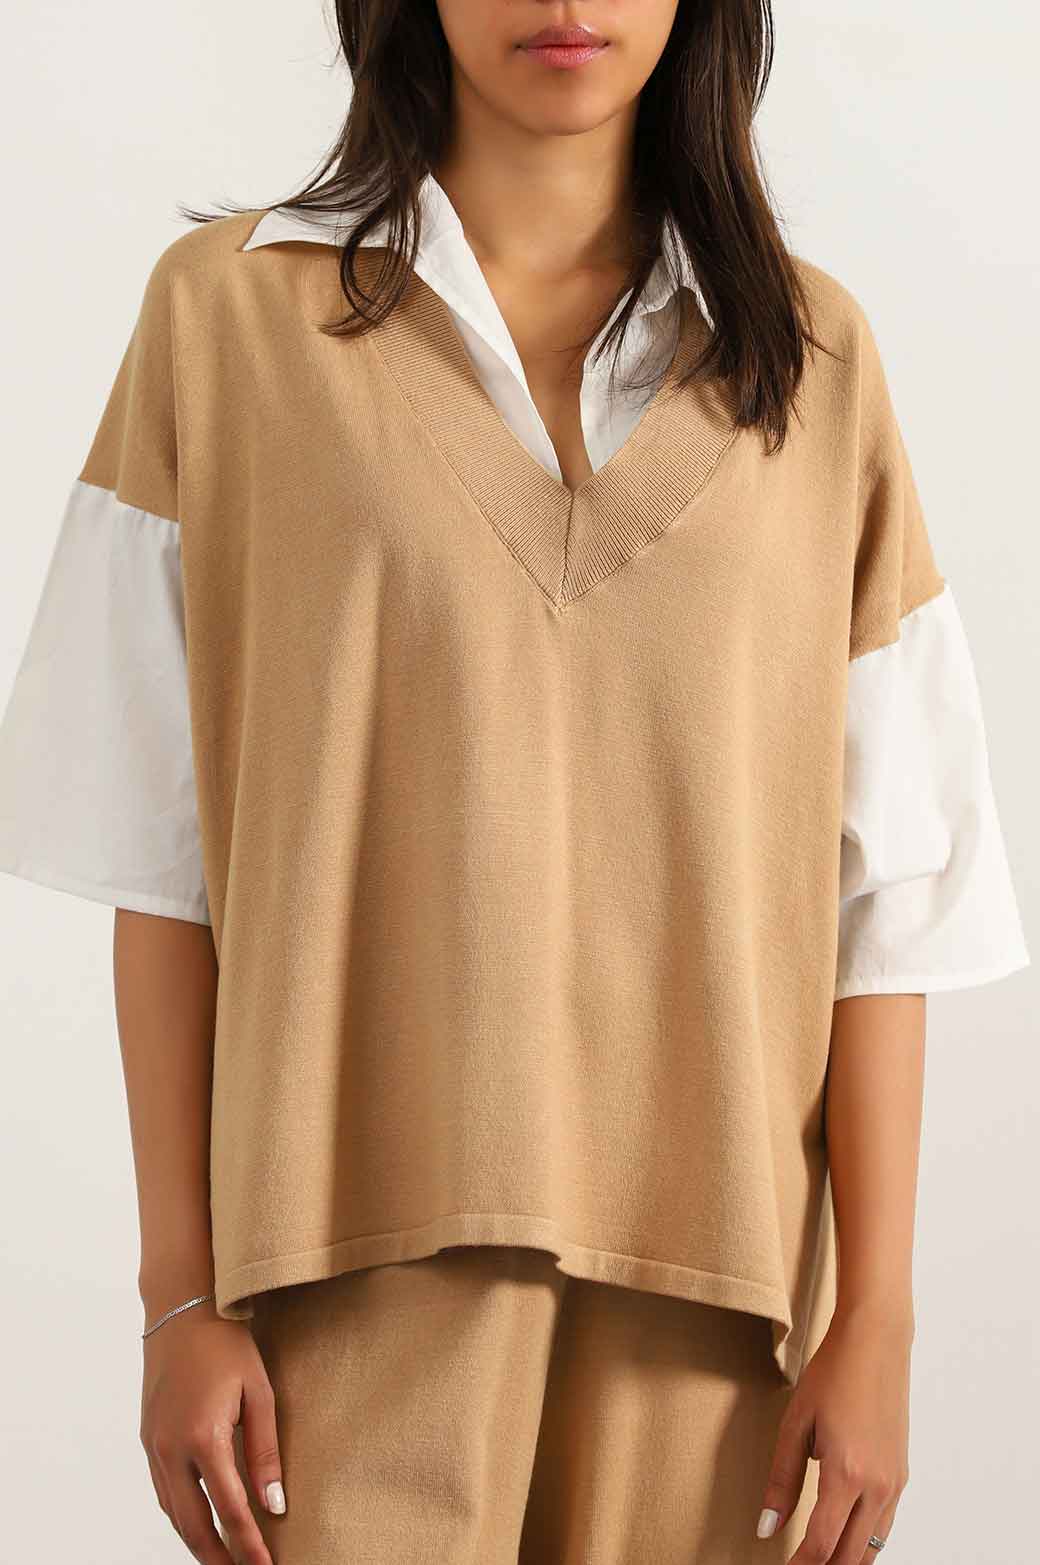 CAMEL SWEATER WITH ATTACHED SHIRT